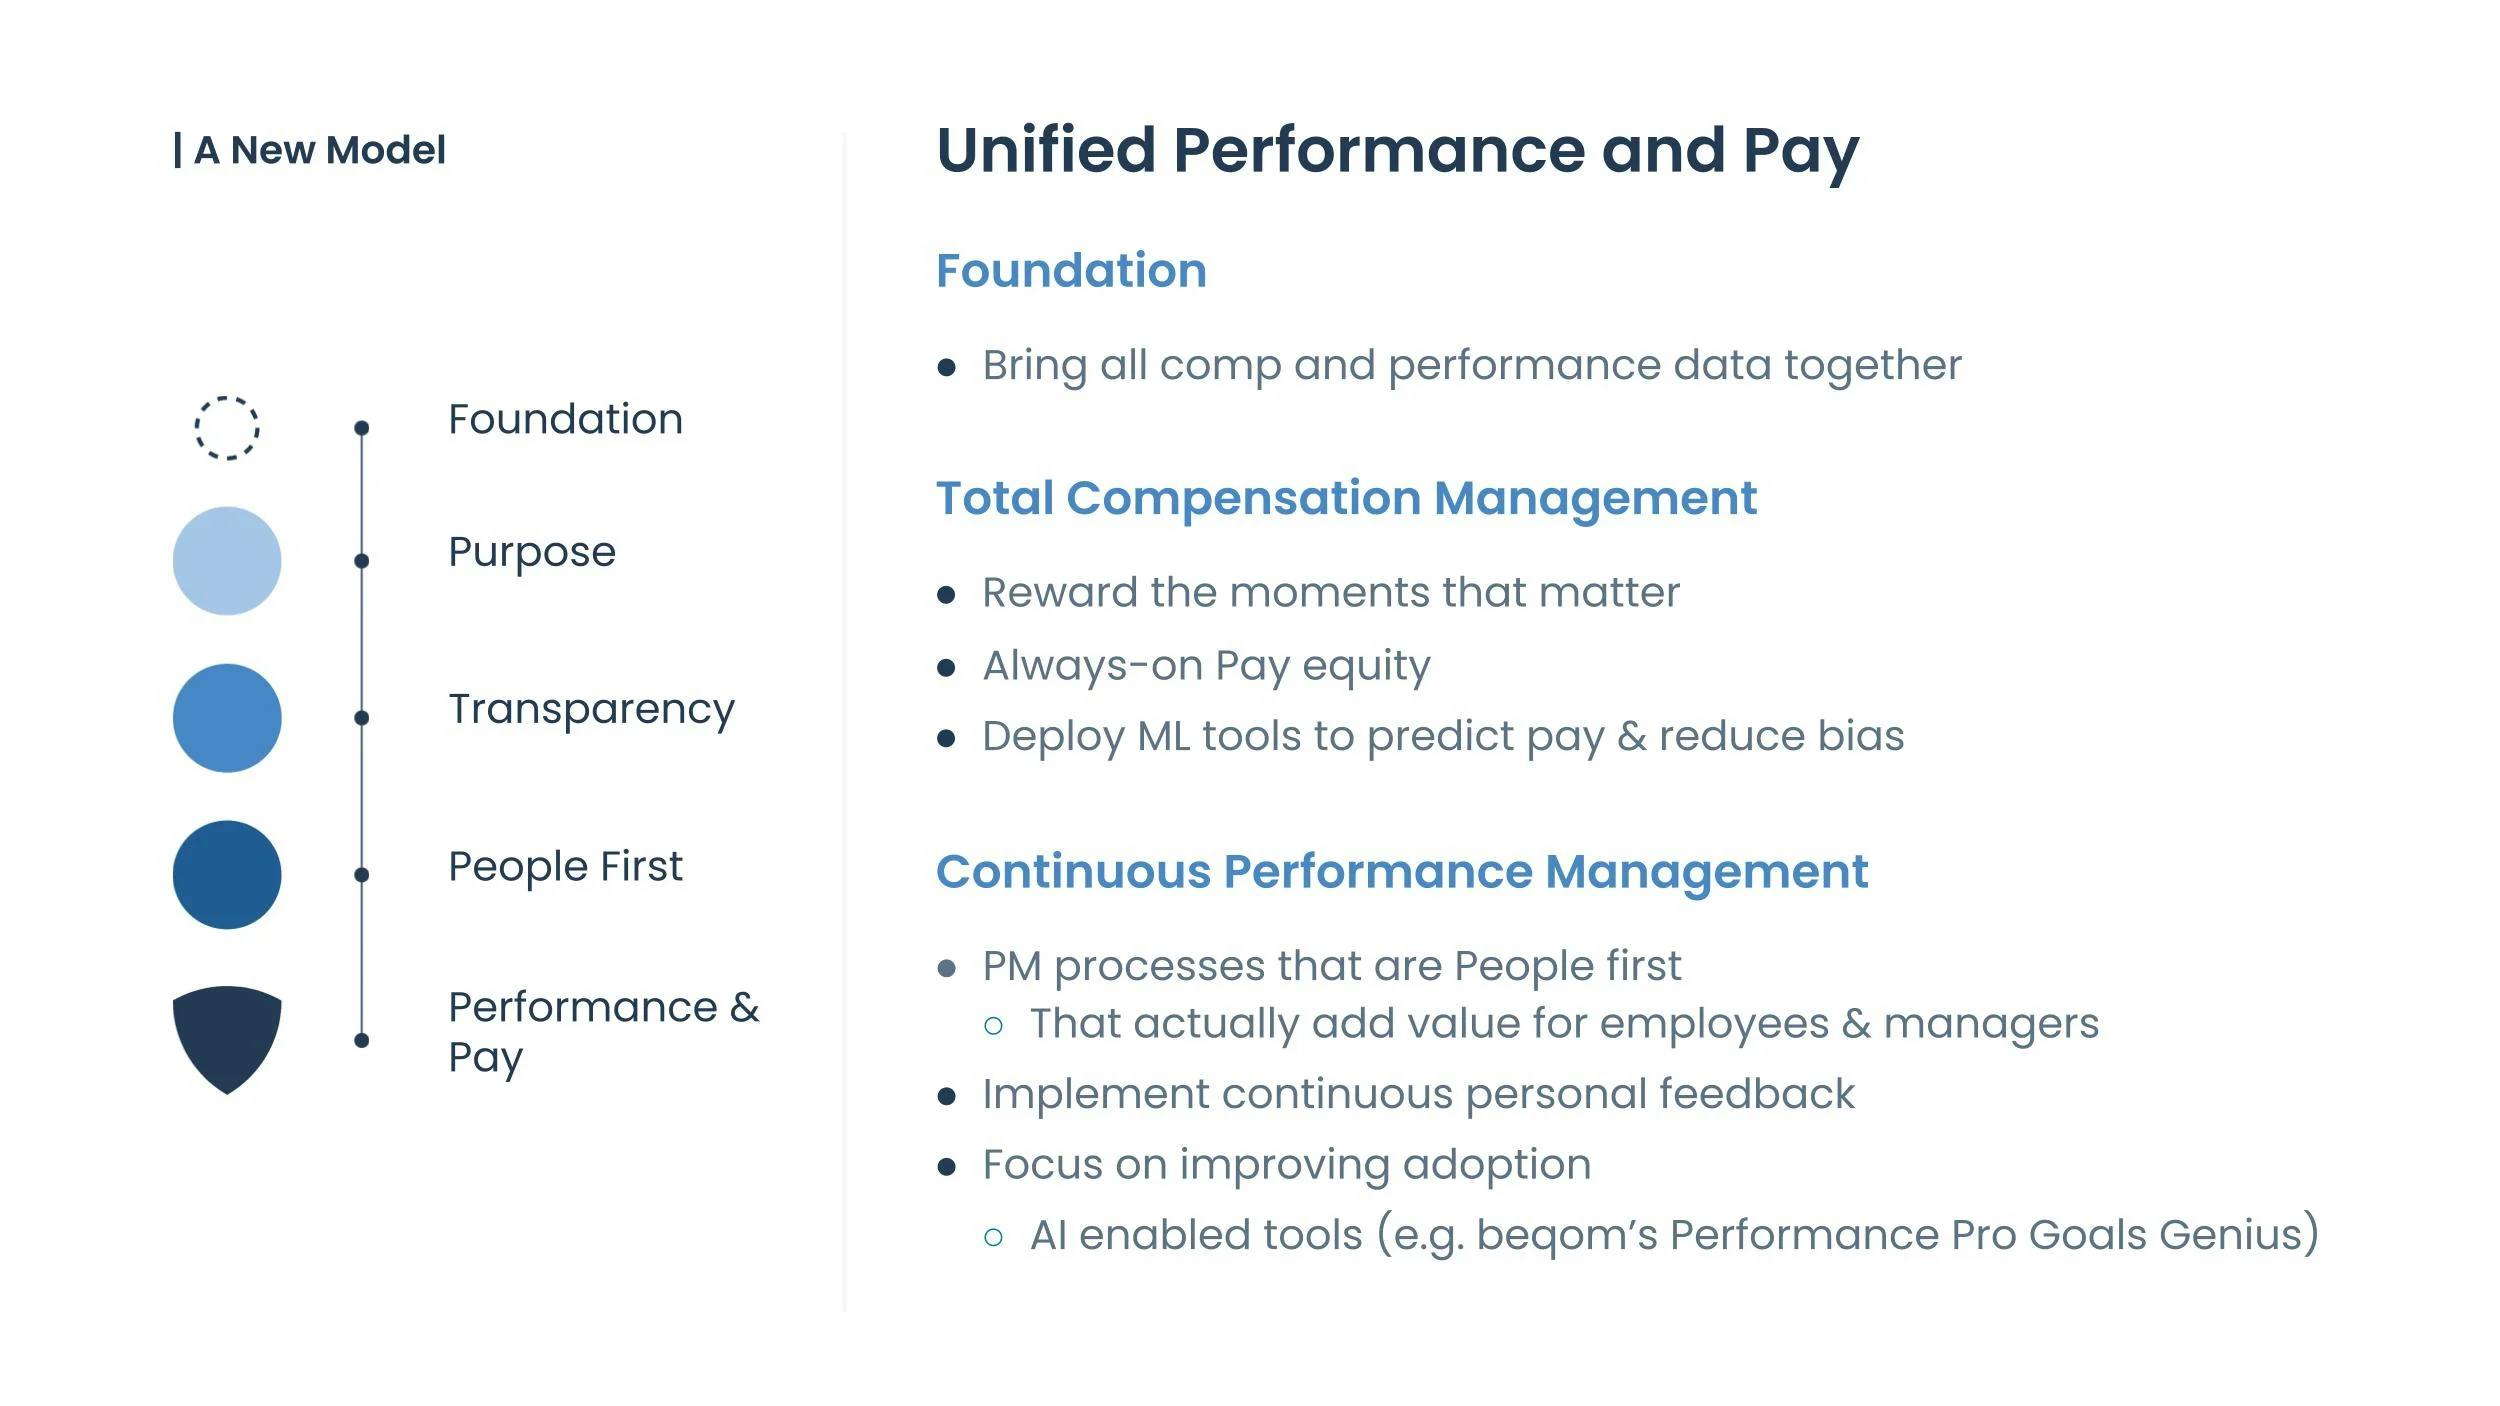 Unified performance and pay elements